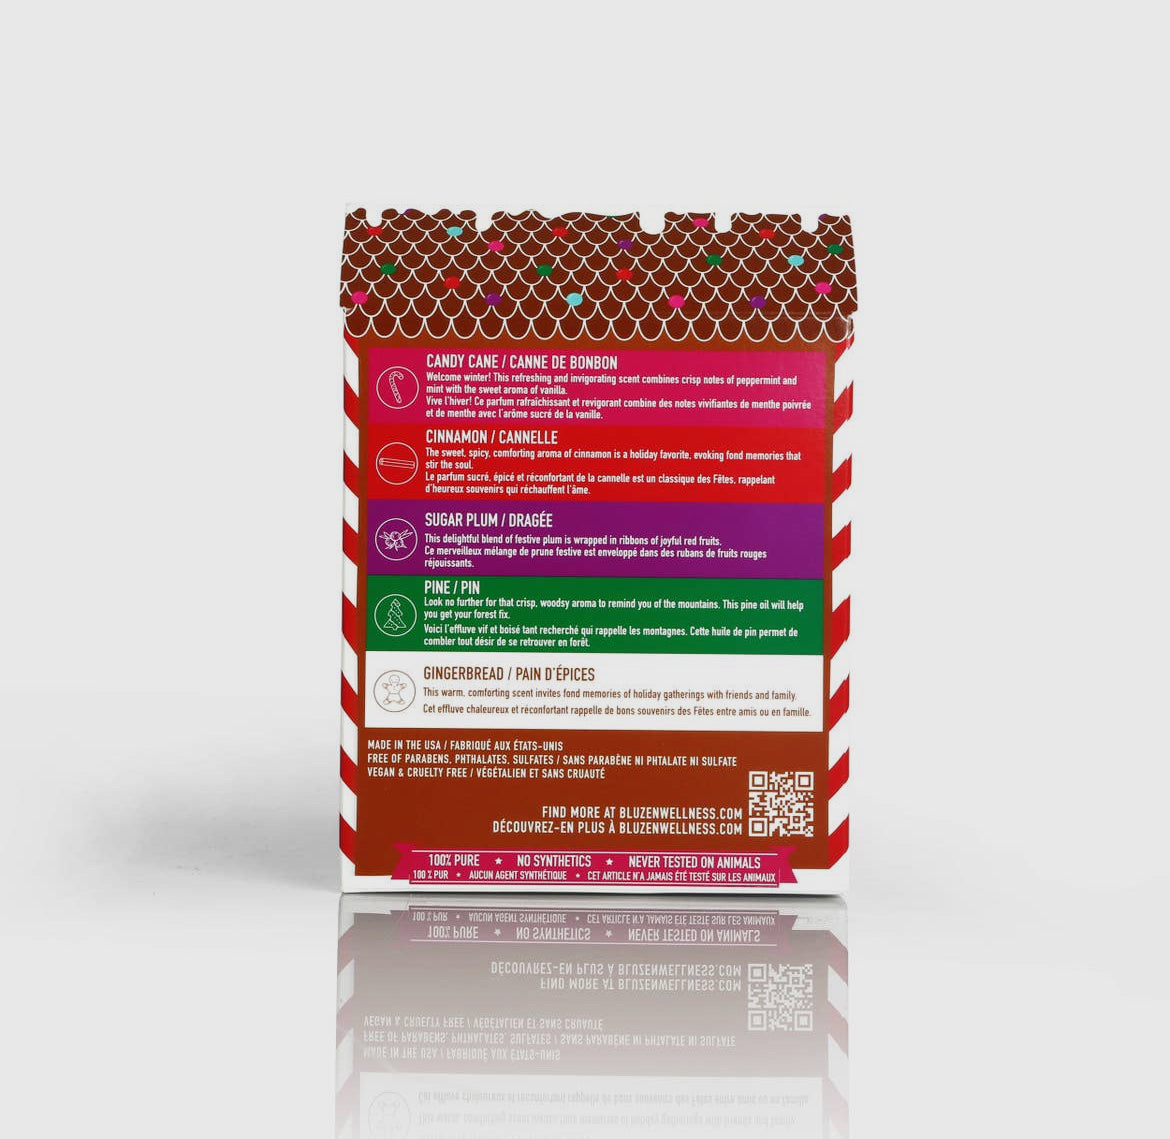 Gingerbread House Essential Oil Variety Pack